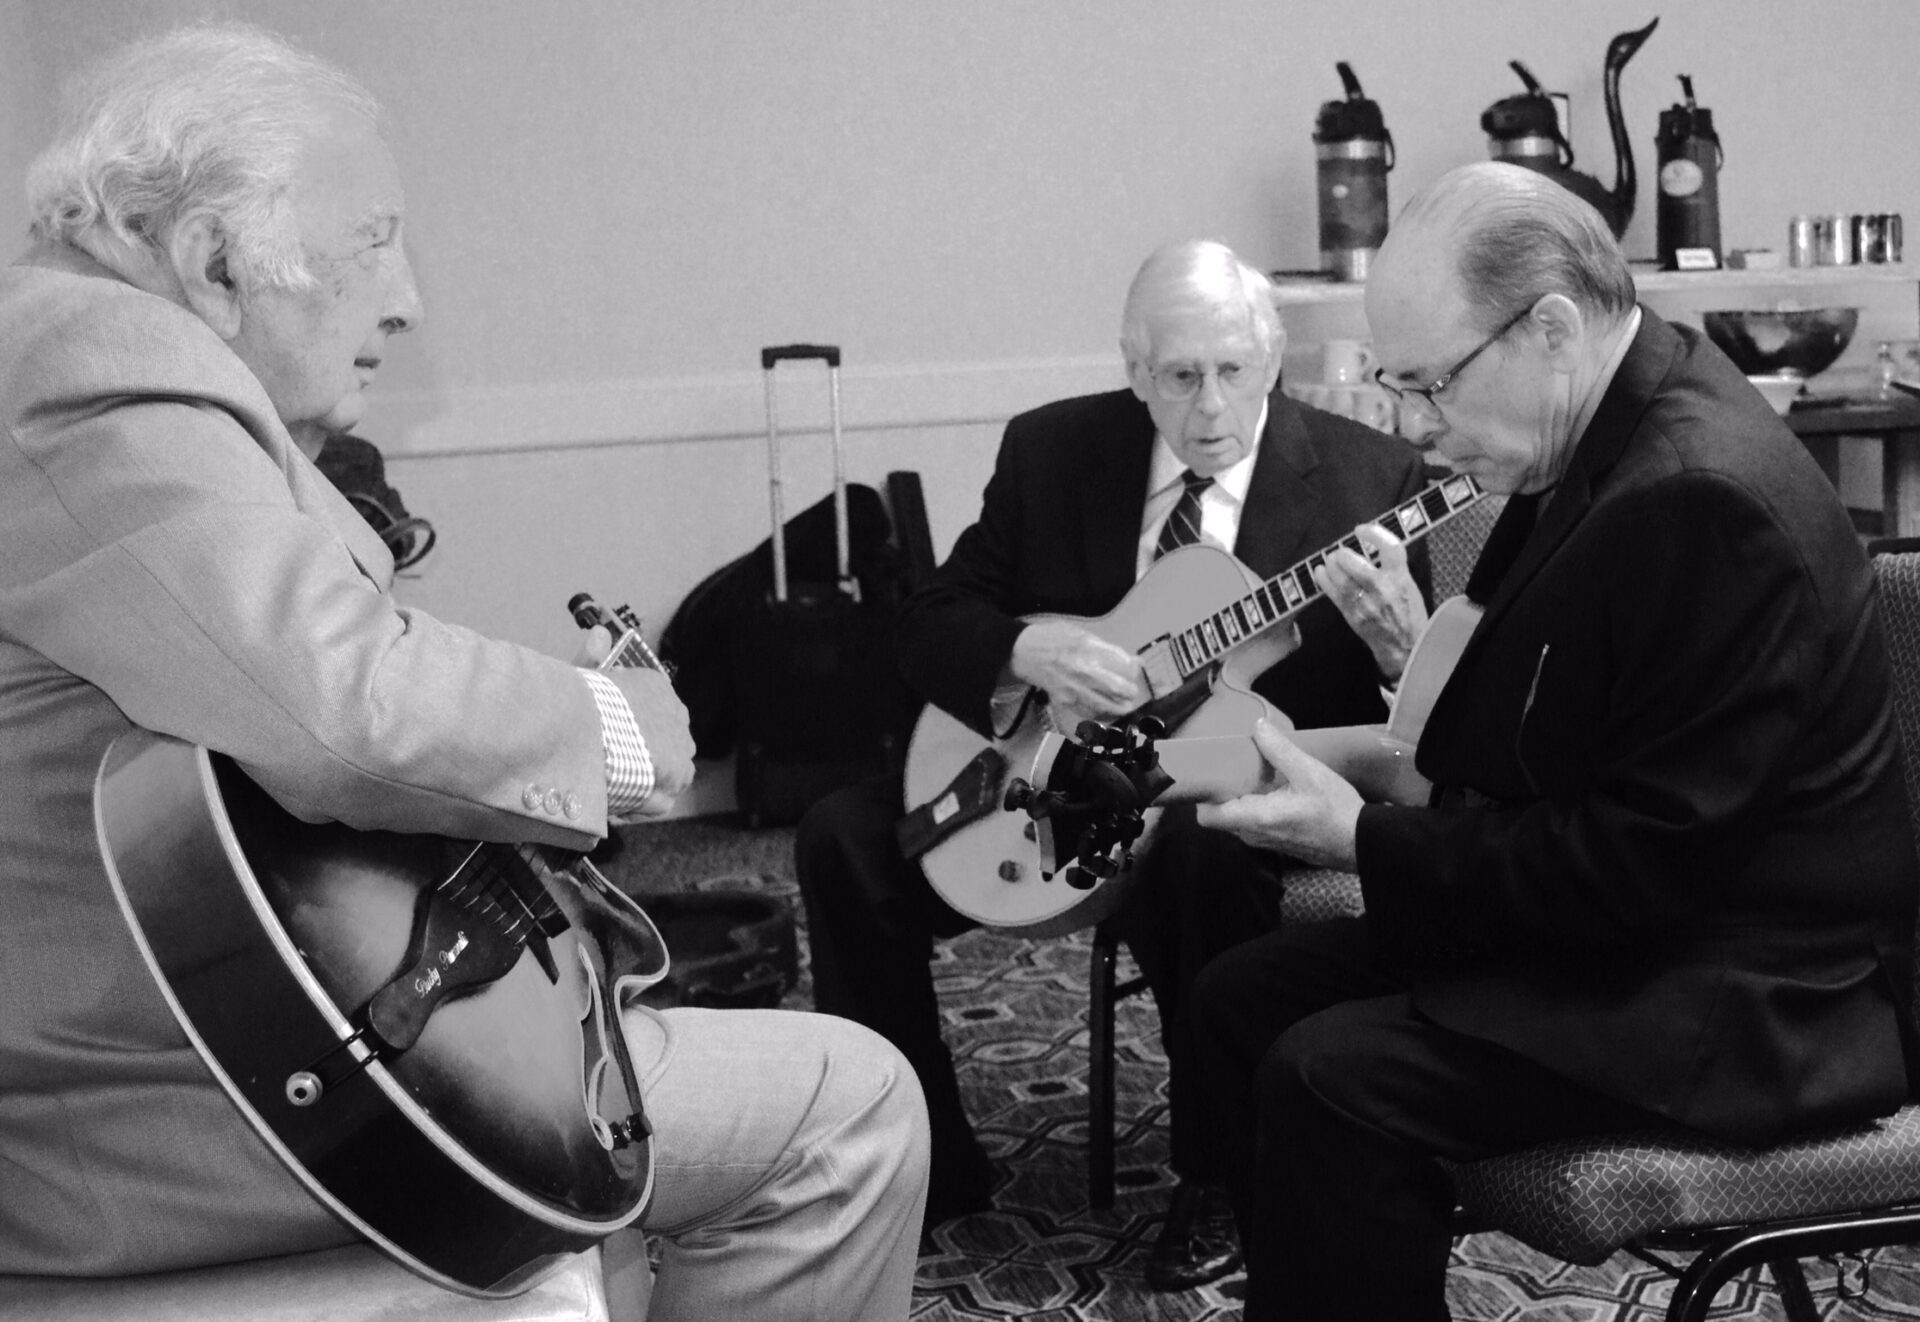 This was taken at the San Diego Jazz Party during one of the best days of my life. 

L to R: Bucky Pizzarelli, Mundell Lowe, Dr. Steve